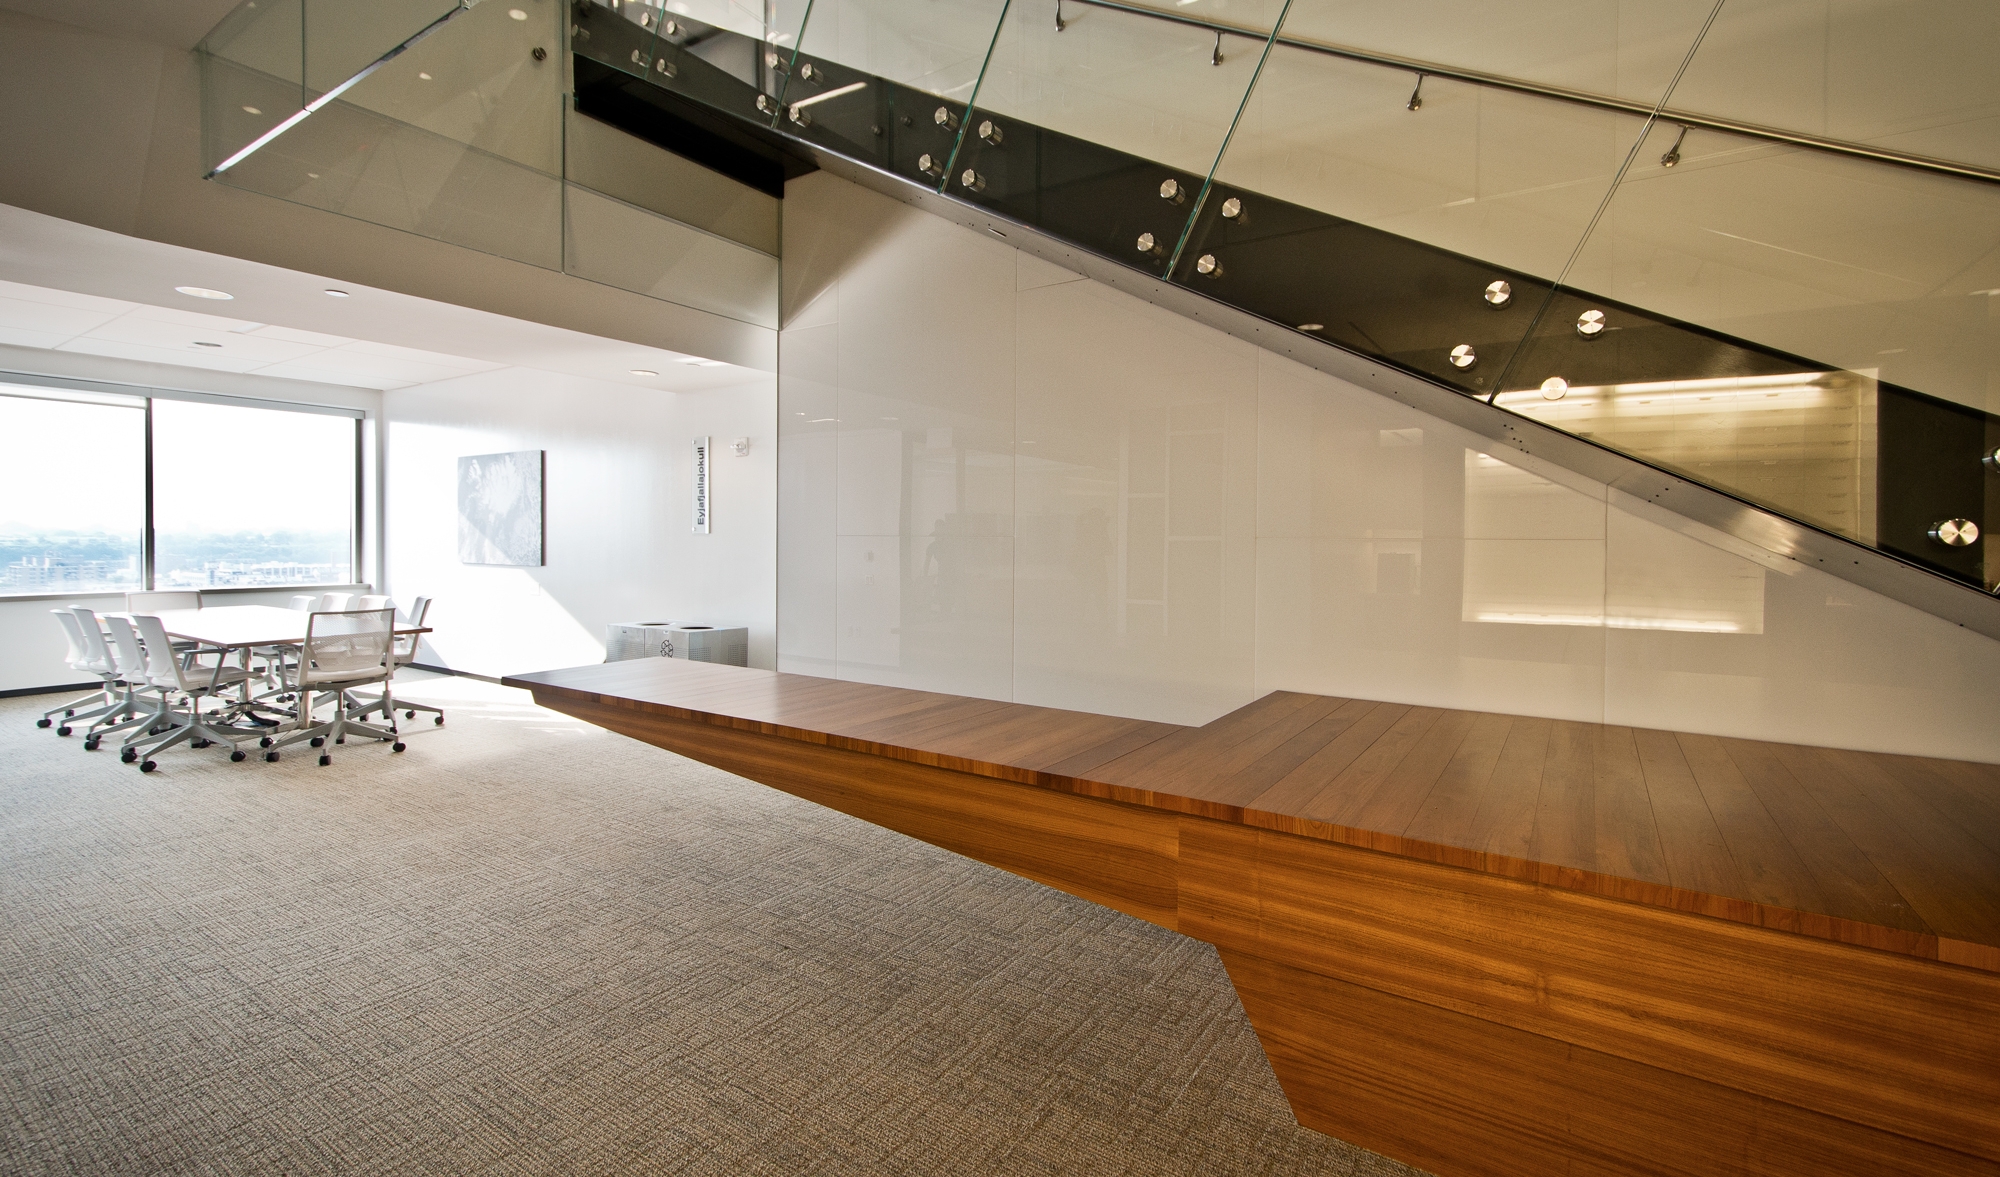 res4-resolution-4-architecture-modern-commercial-rms-riskmanagementsolutions-hoboken-newjersey-interior-office-lobby.jpg